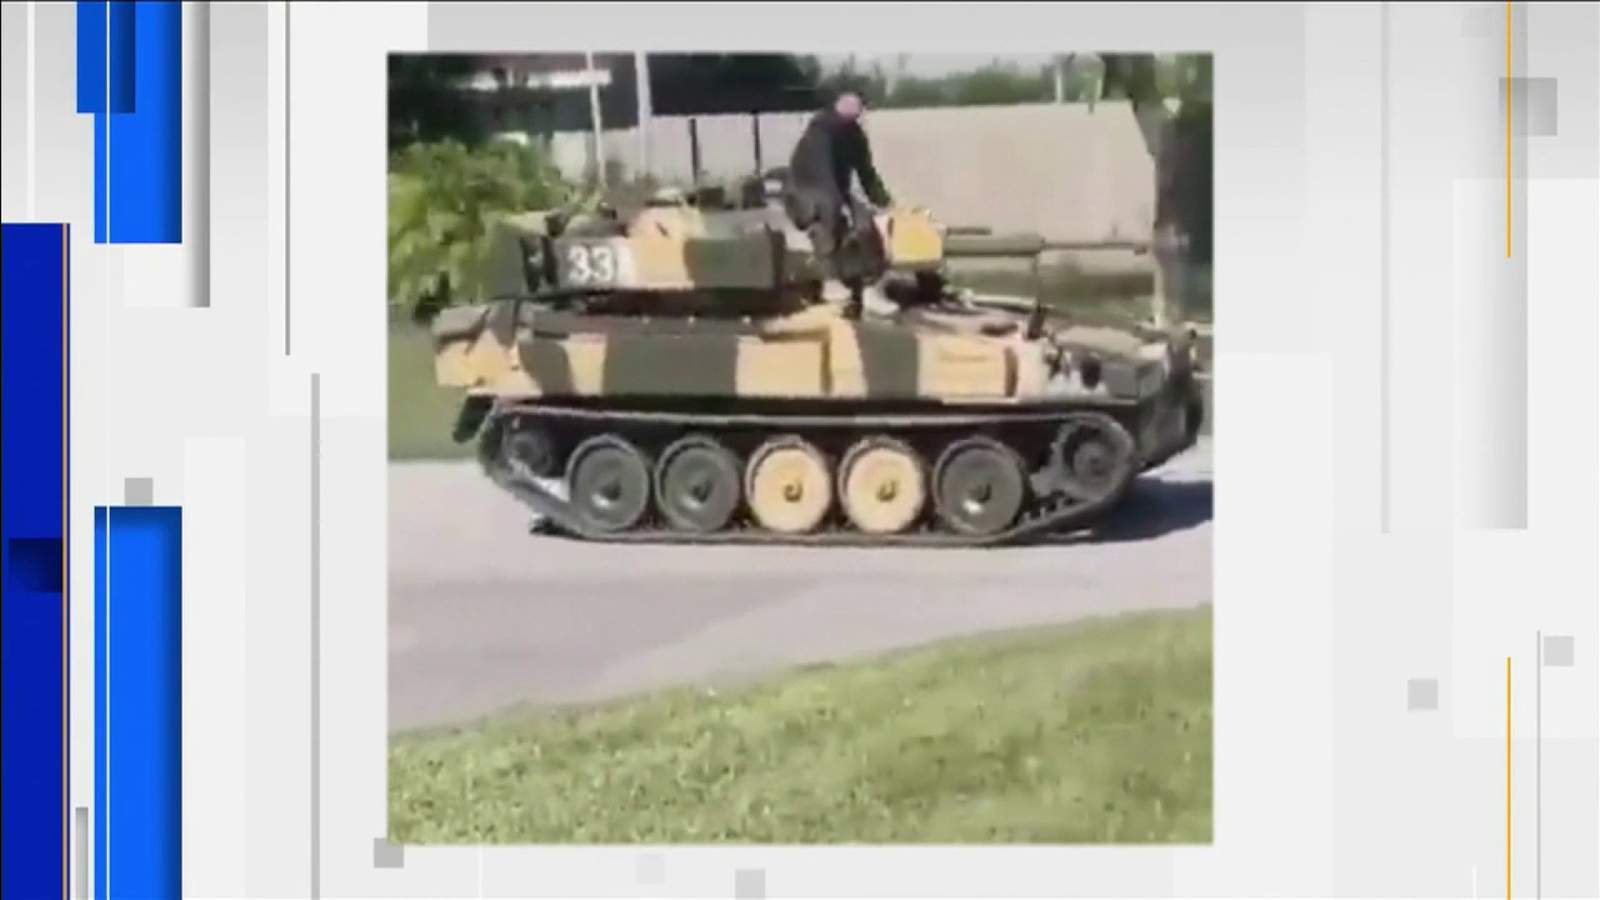 Why was a tank driving around a Miami-Dade neighborhood?